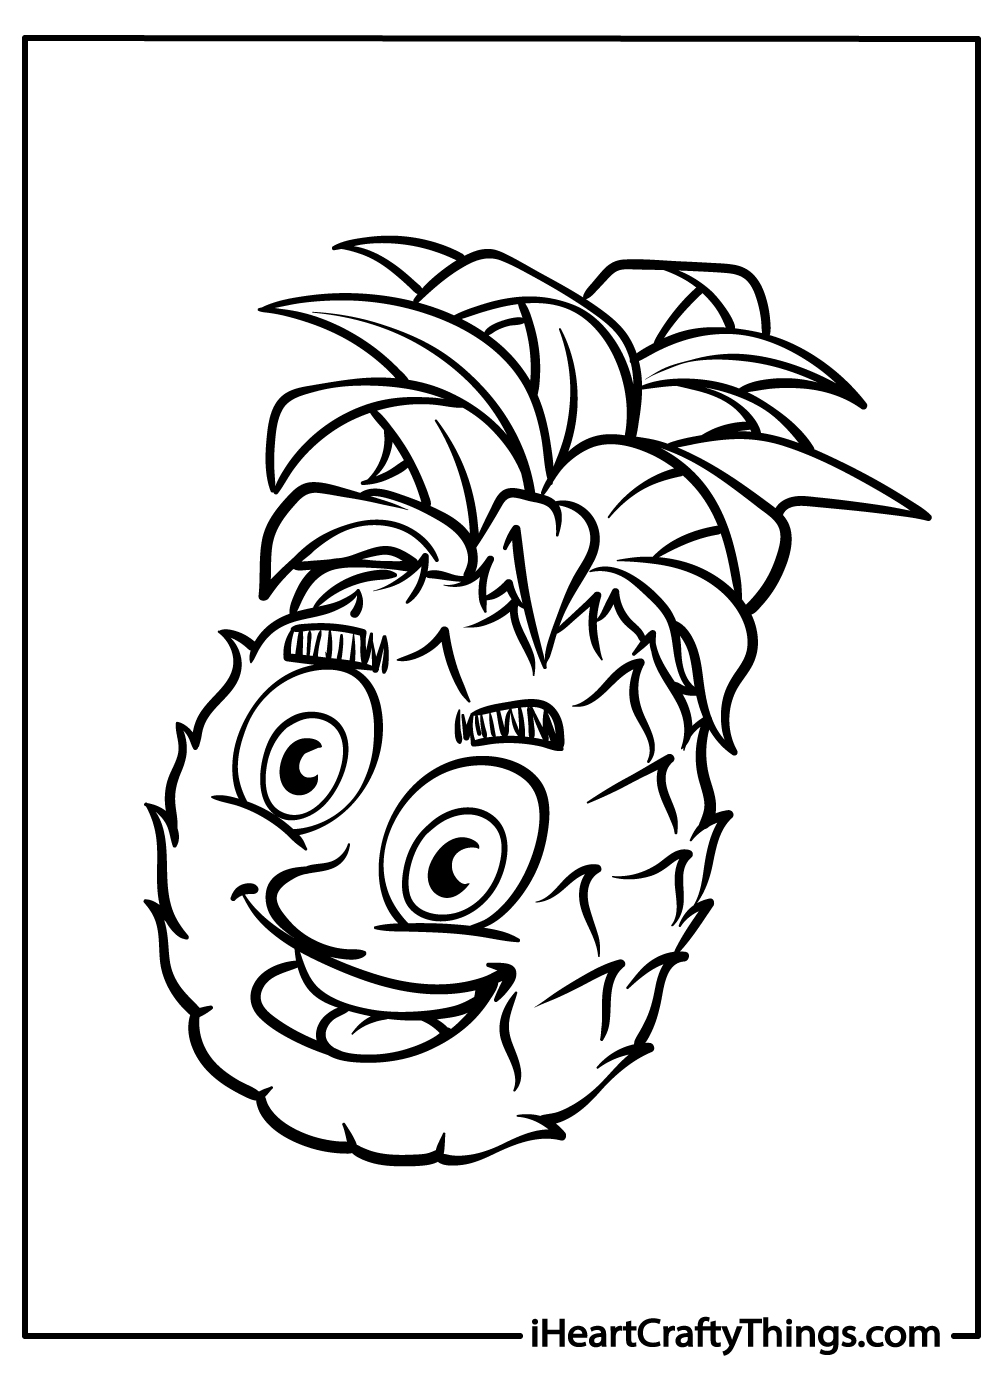 black-and-white pineapple free download